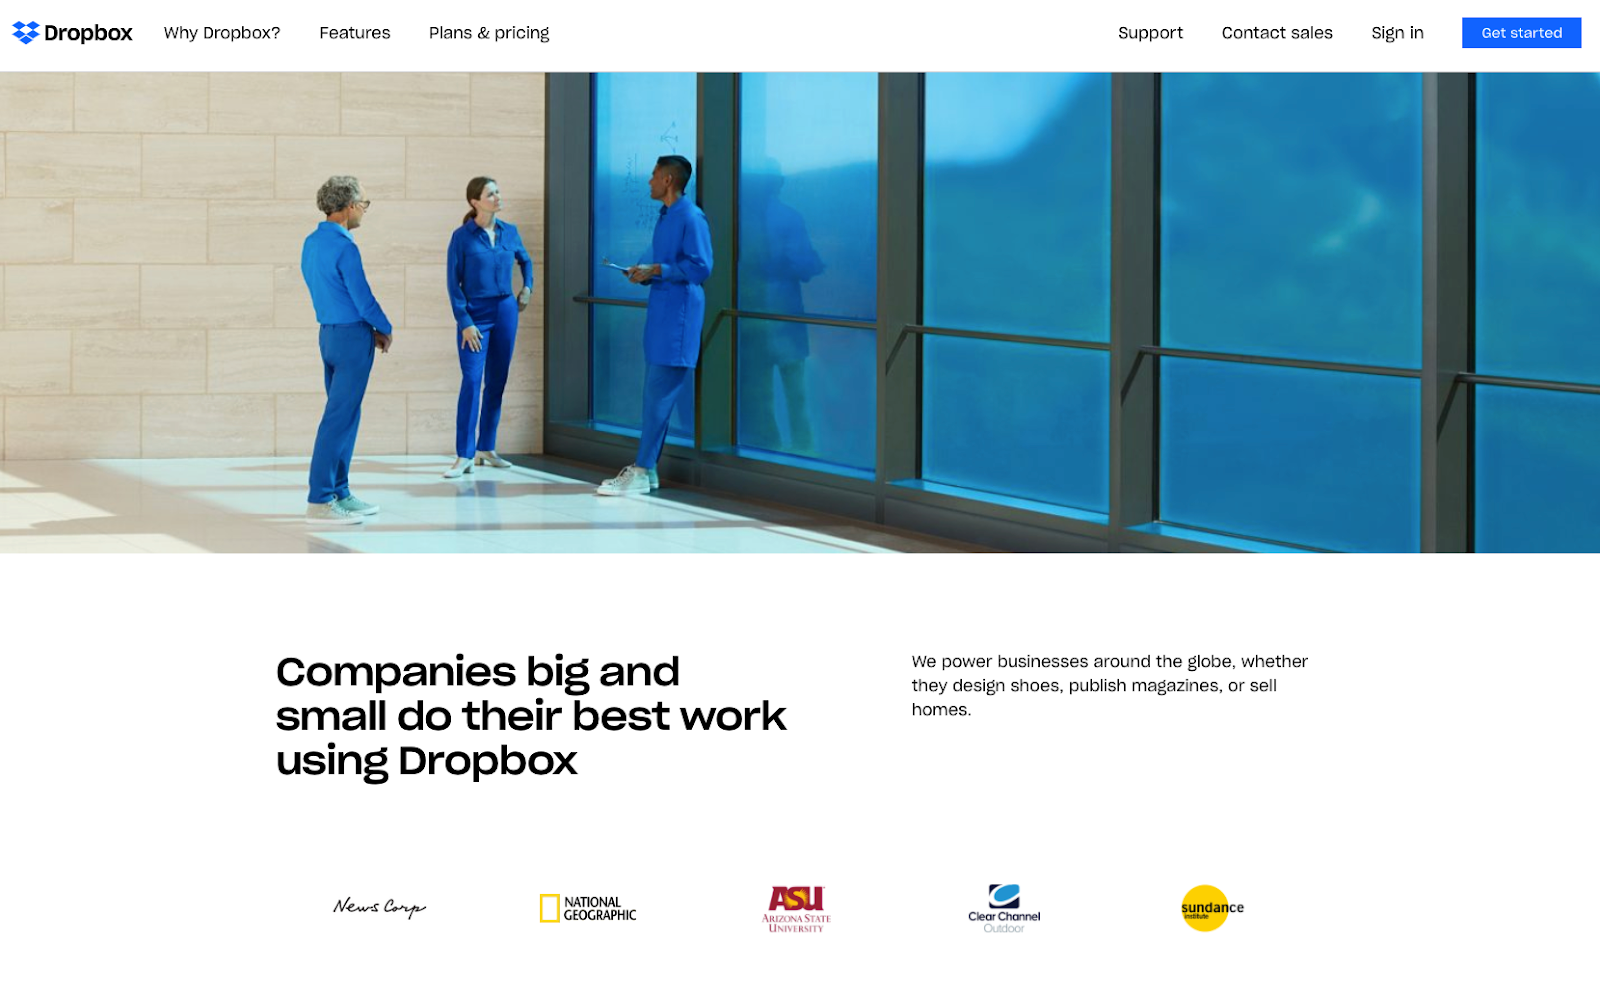 Dropbox's use of white space is another example of web design trends for 2023